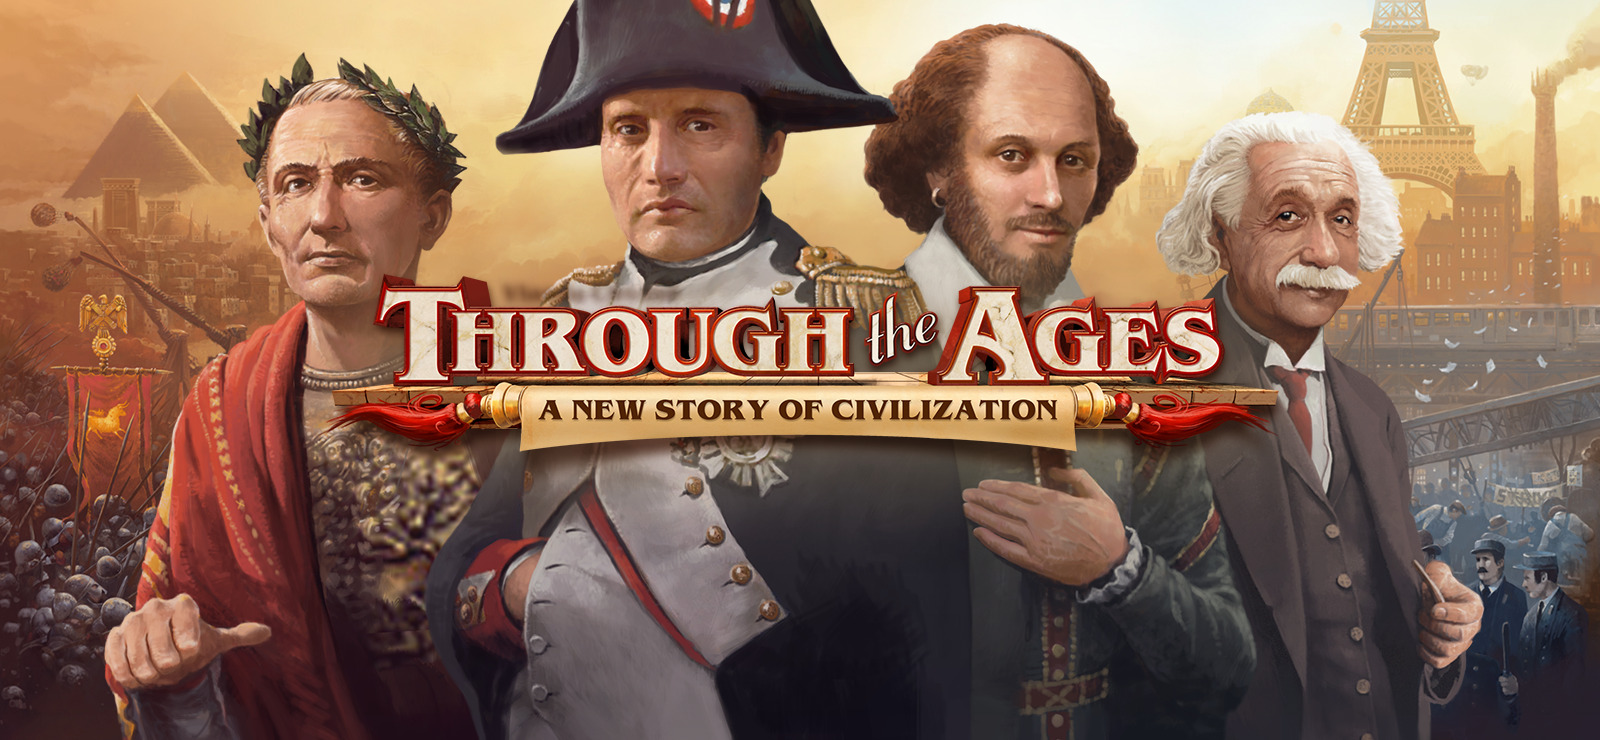 Through the Ages v 2.13.416 (58713) + DLC: New Leaders & Wonders